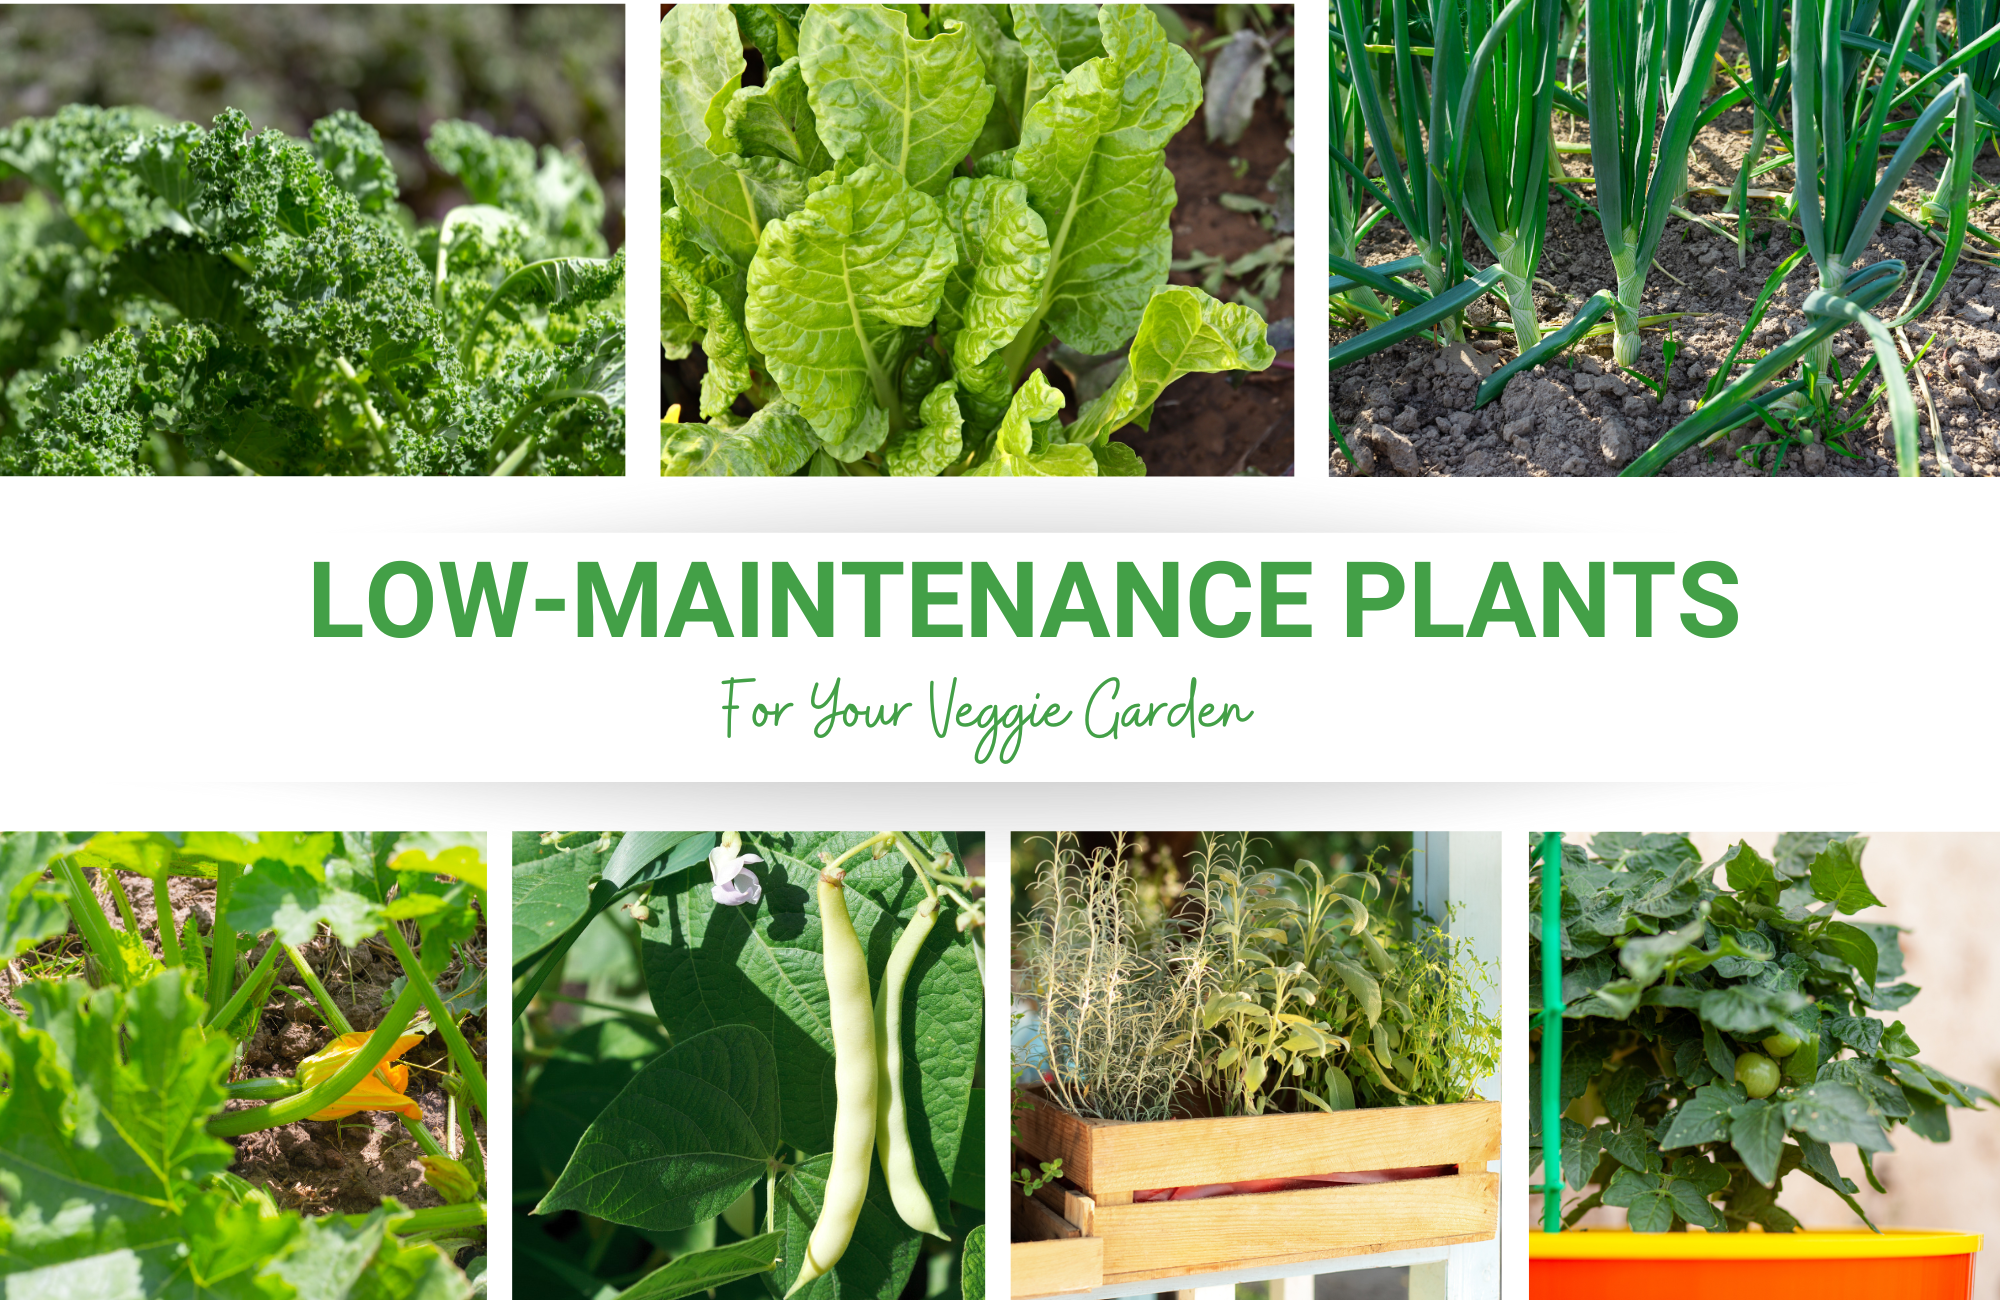 Collage of plant images with the words "low-maintenance plants for your veggie garden"